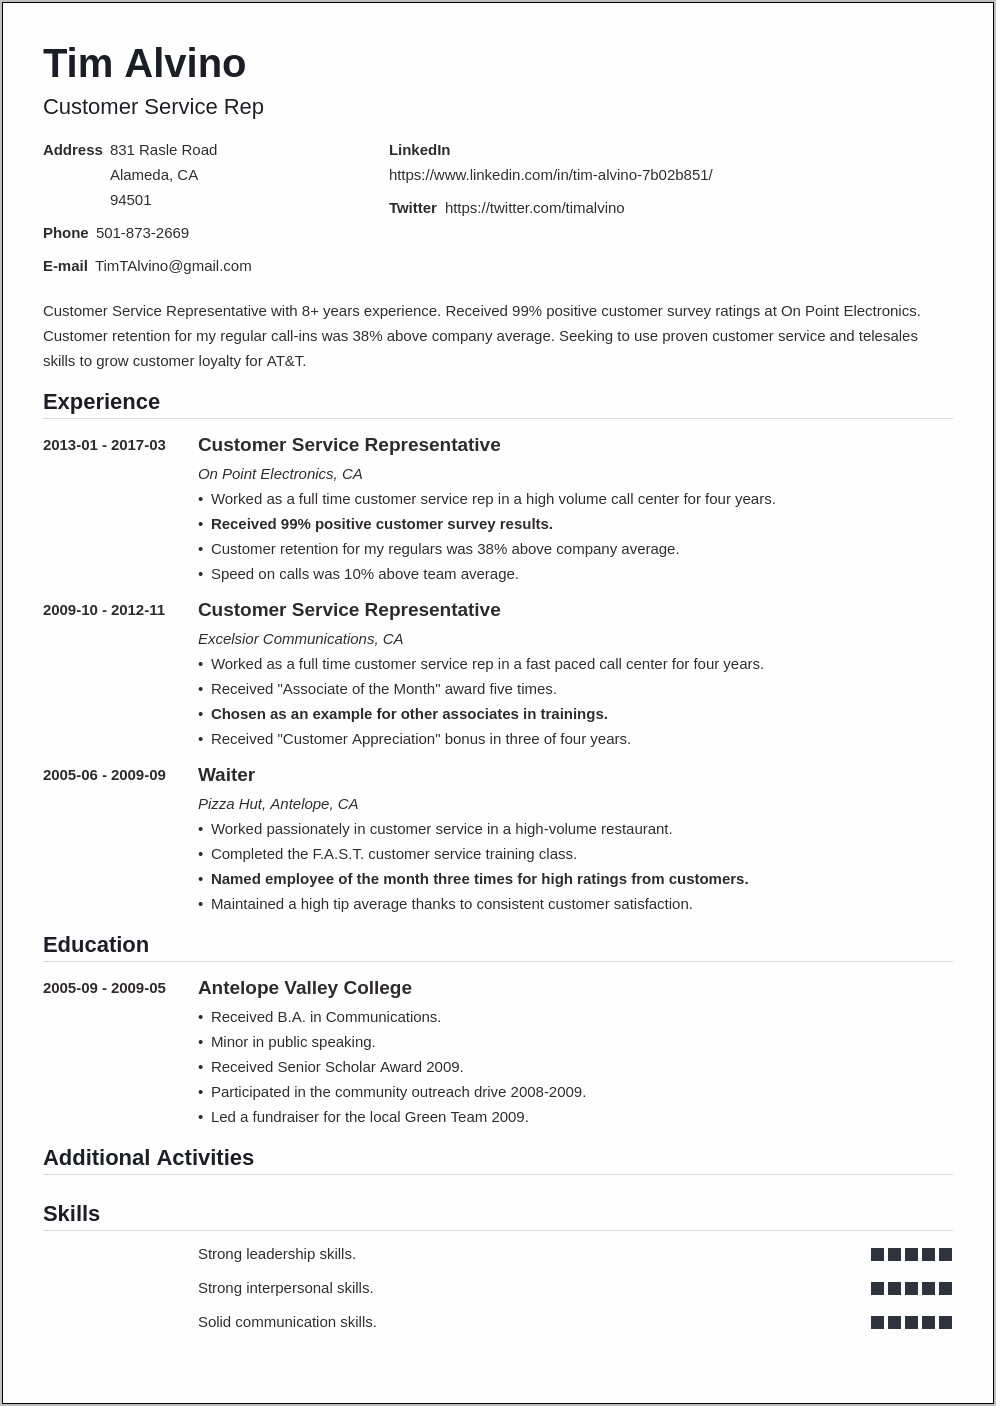 Patient Access Rep Resume Objective